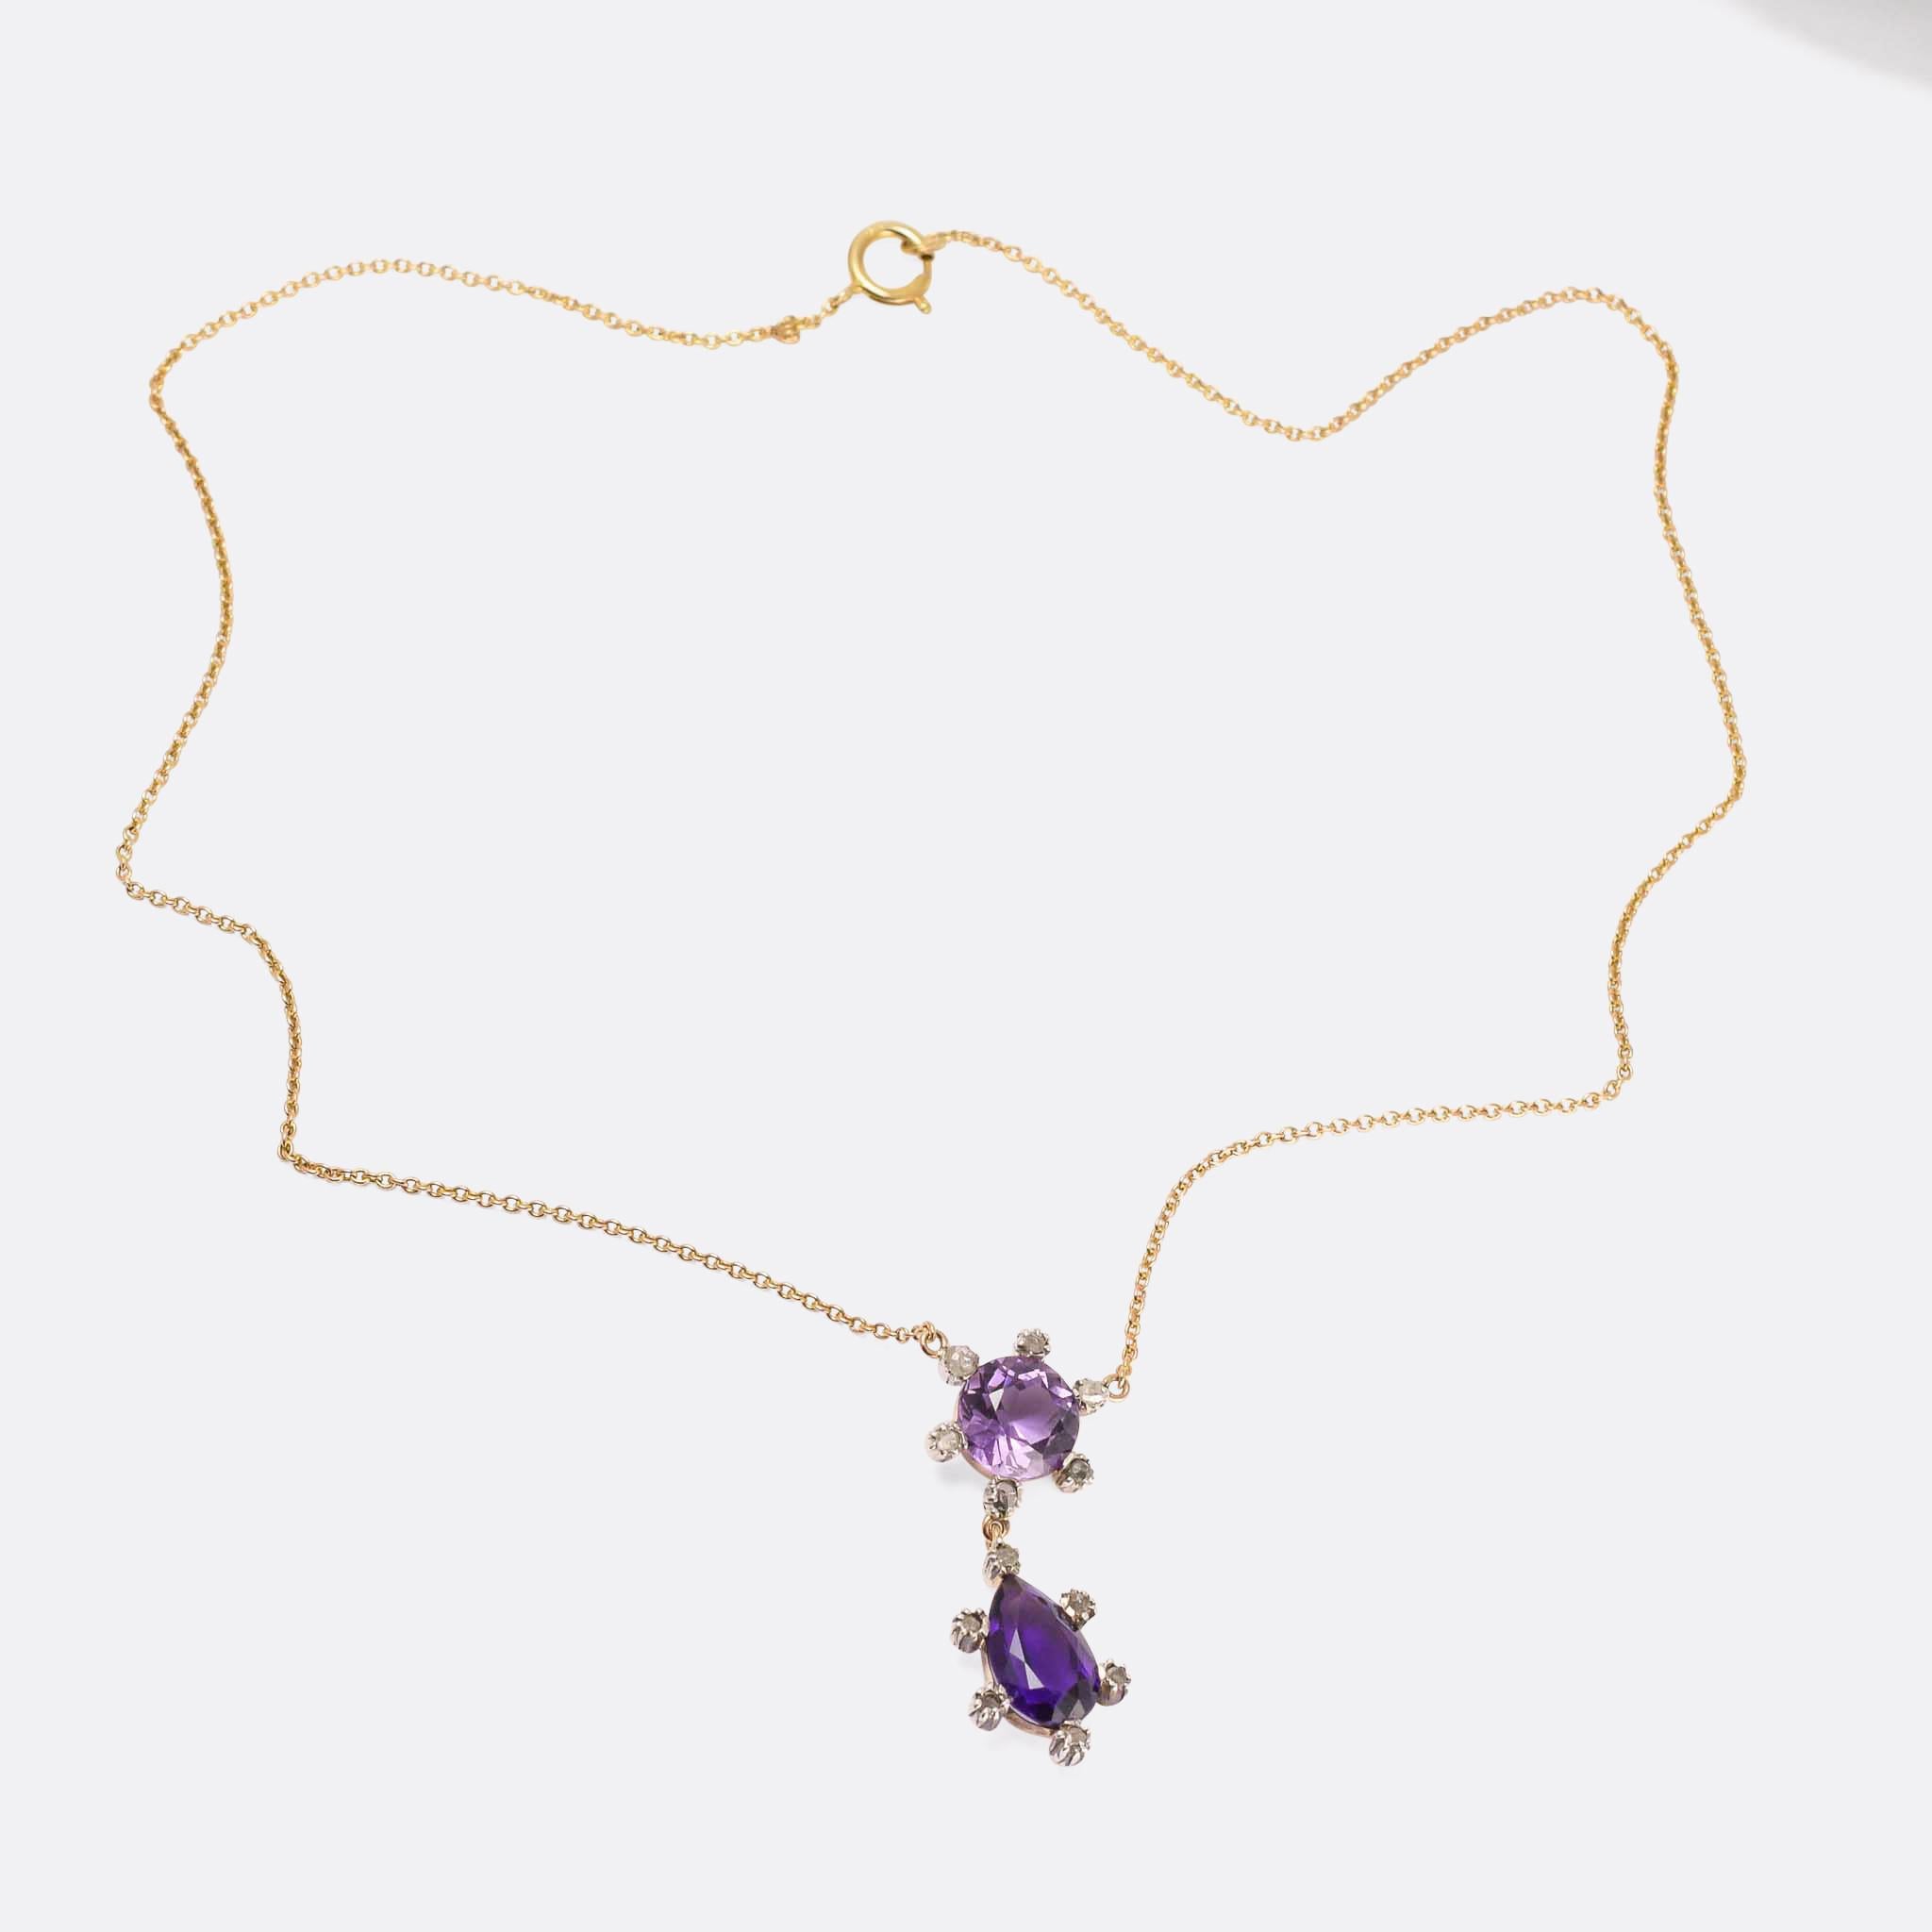 A particularly lovely Victorian necklace set with amethysts and diamonds. It dates from the 1880s, and the two amethysts differ in cut and in colour: the top stone is round faceted and a pale purple hue, while the bottom one is a pear shape cut and